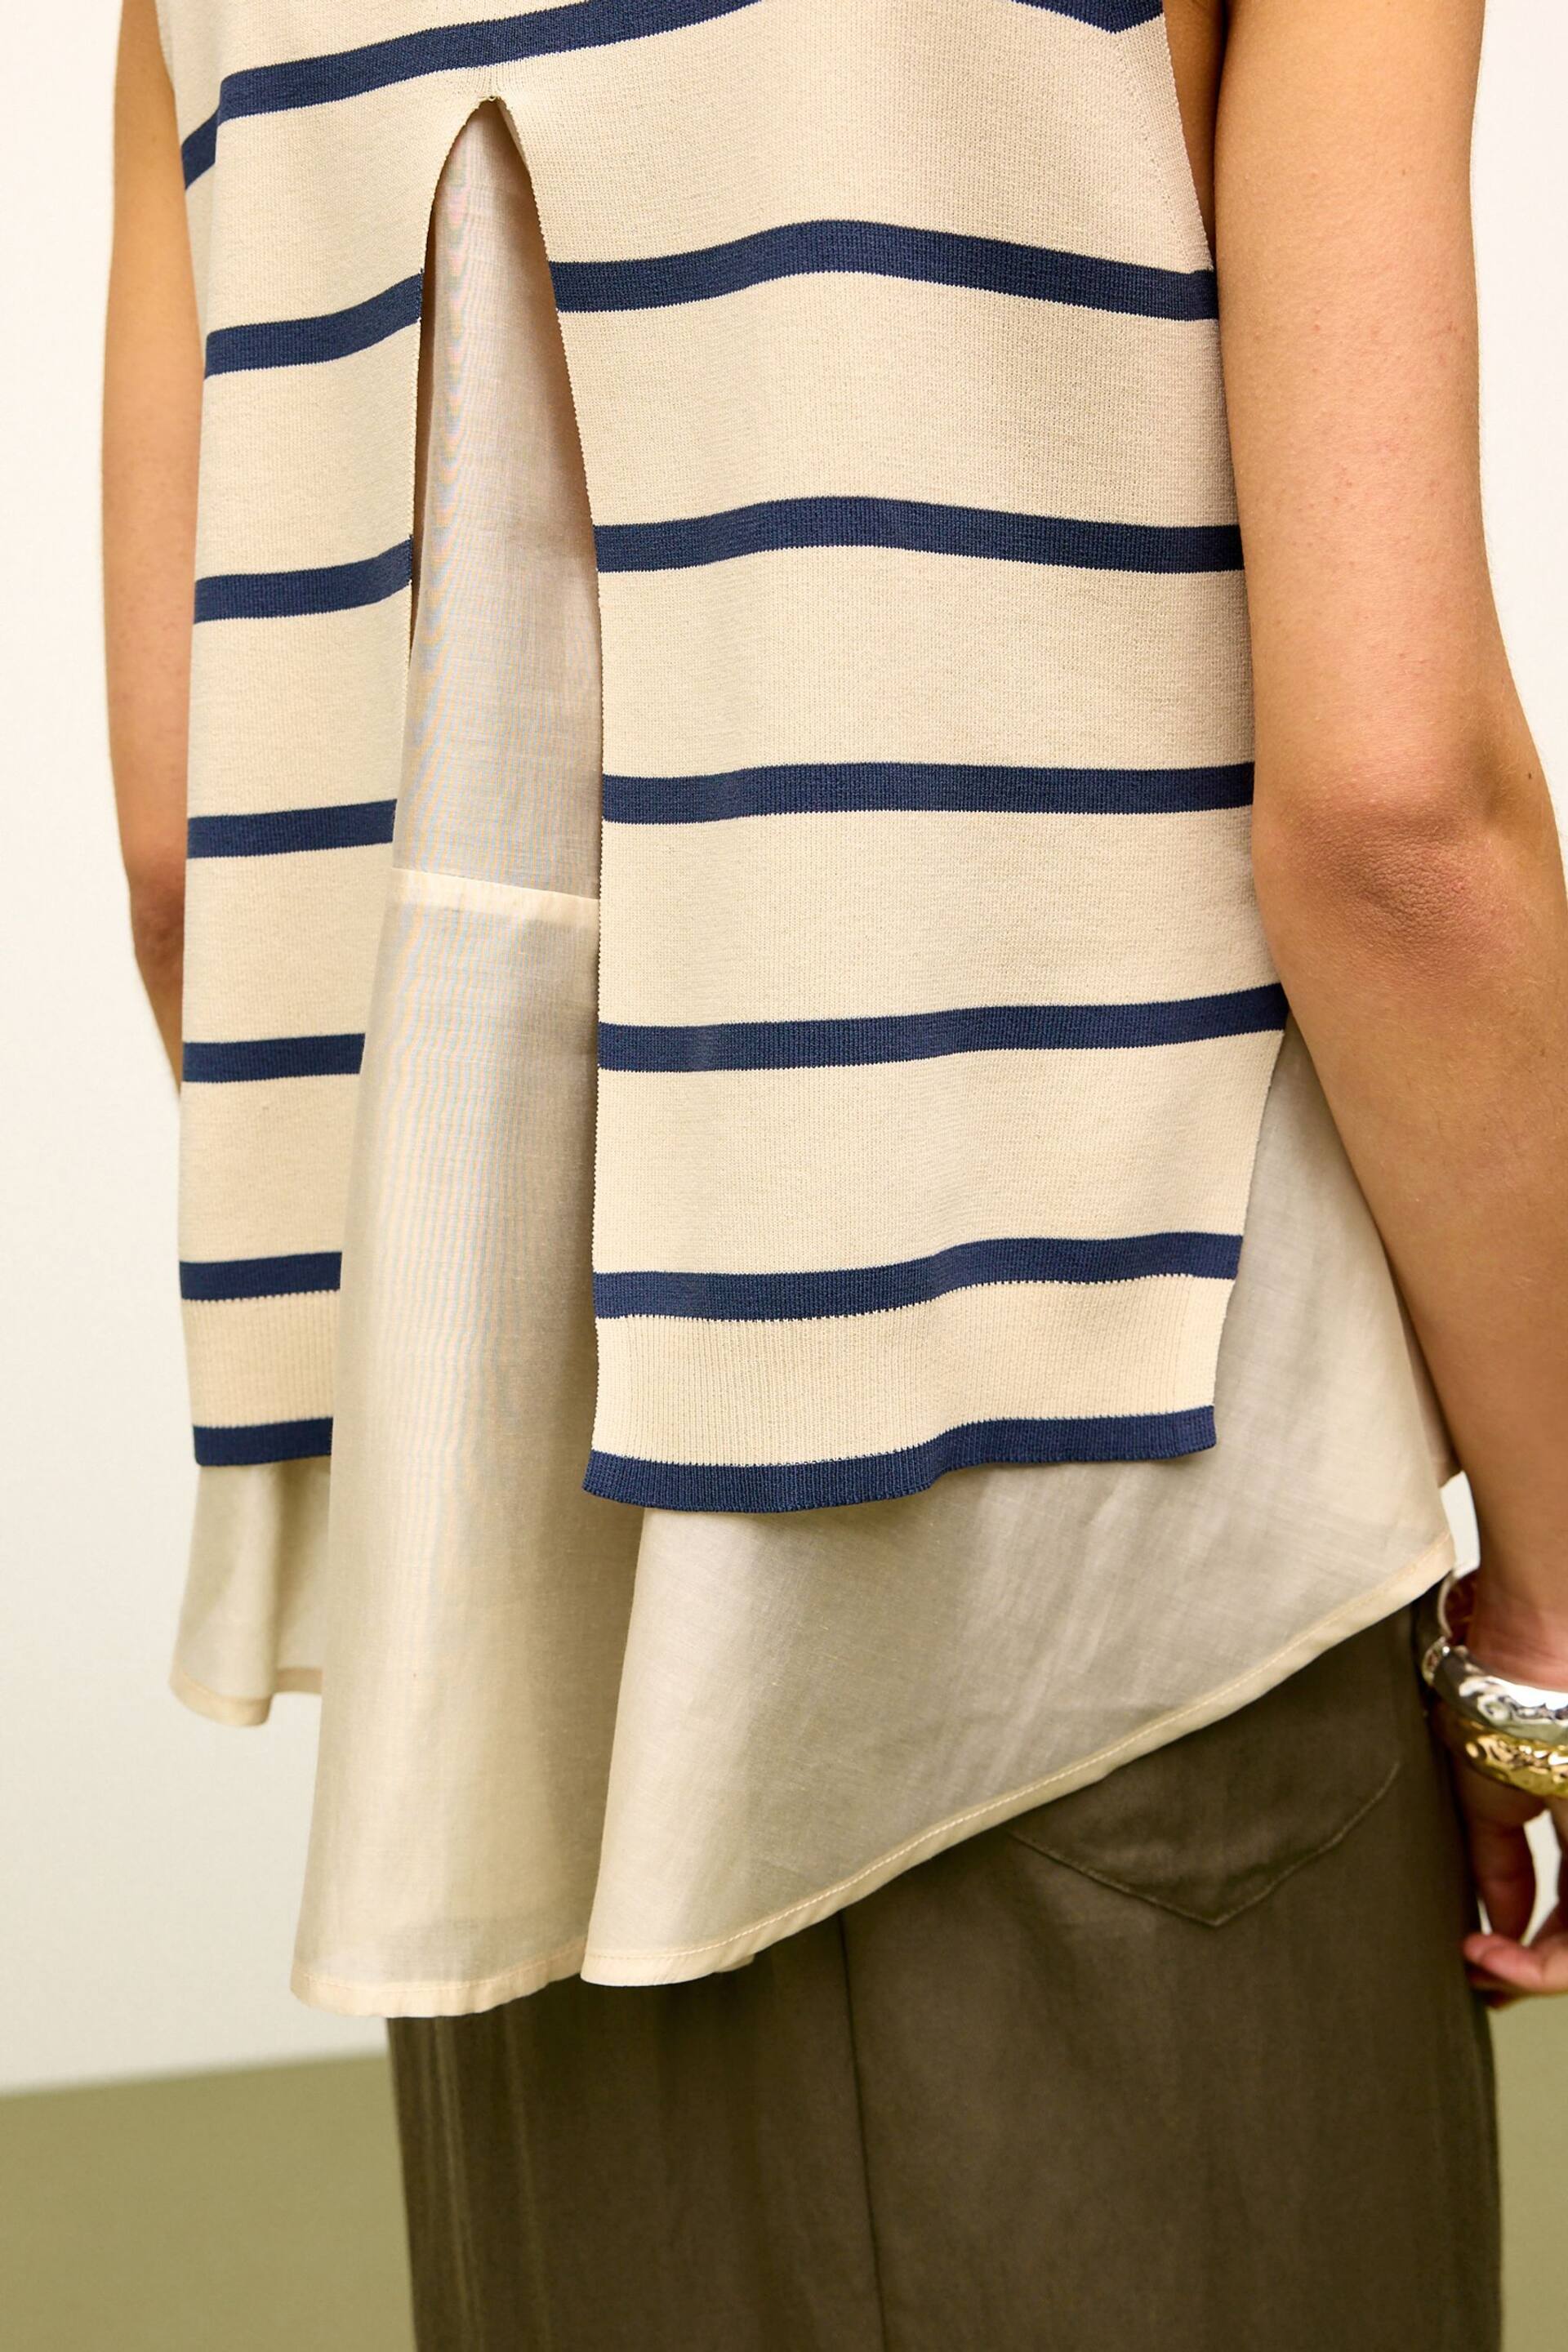 Navy Blue Stripe Woven Mix Sleeveless Layer Top - Image 4 of 6